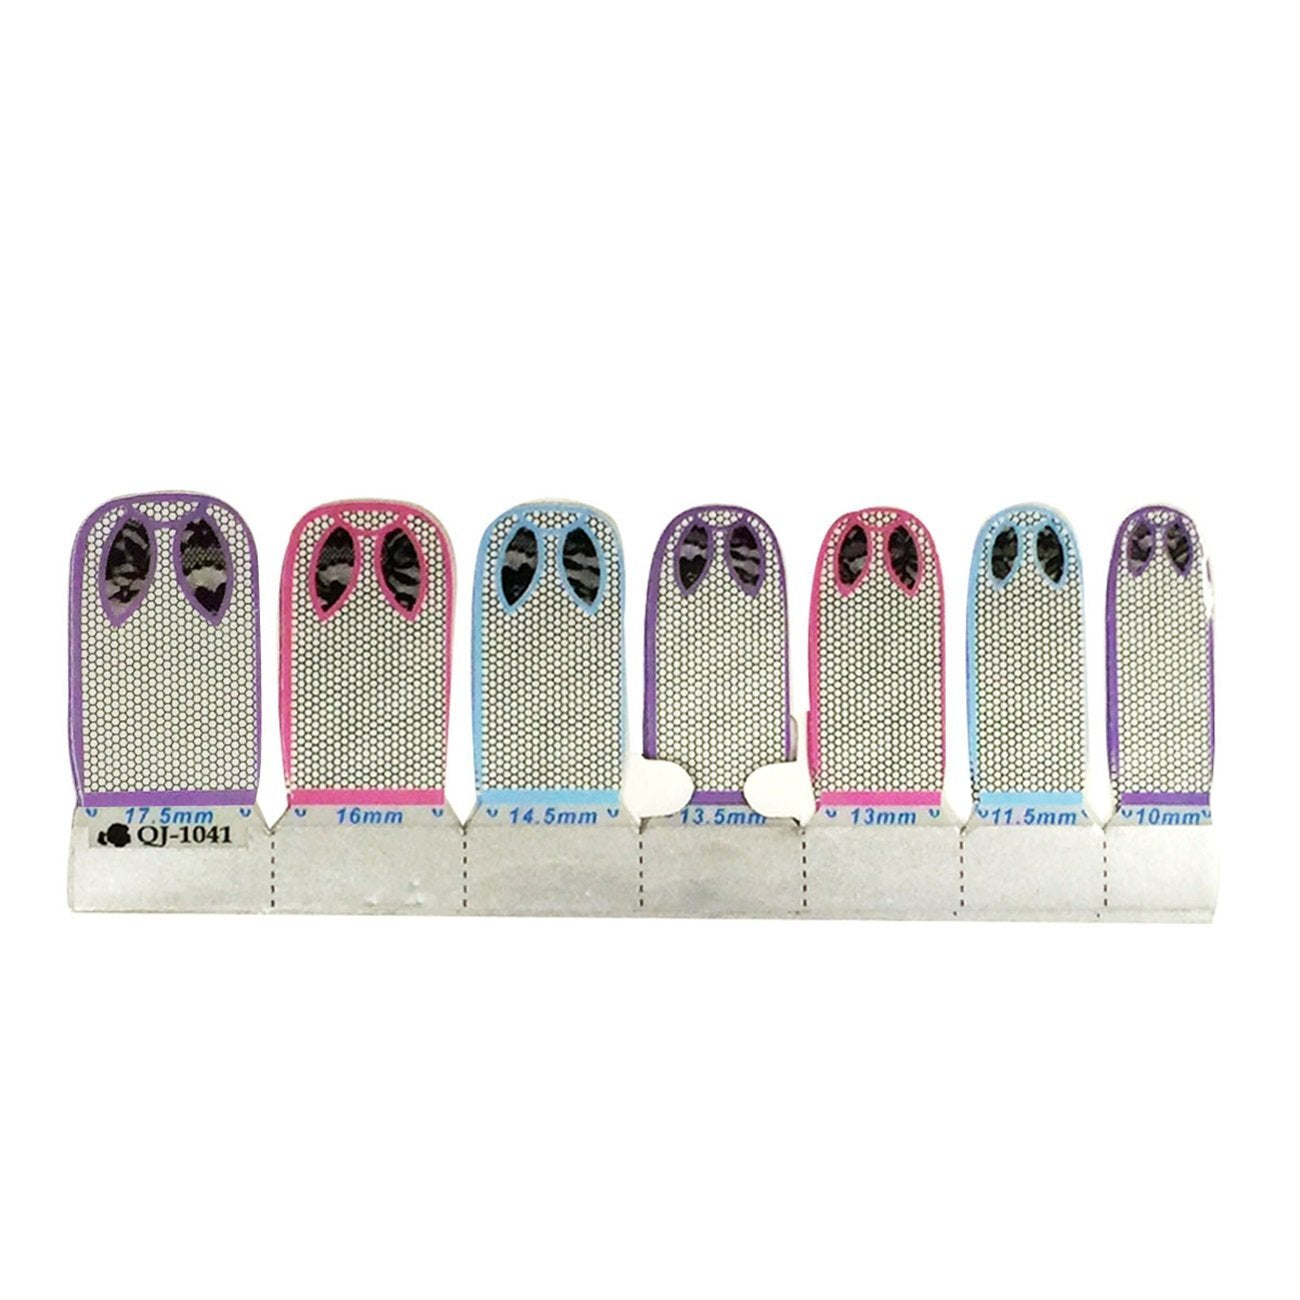 Wrapables Decorative Nail Art Decal Stickers